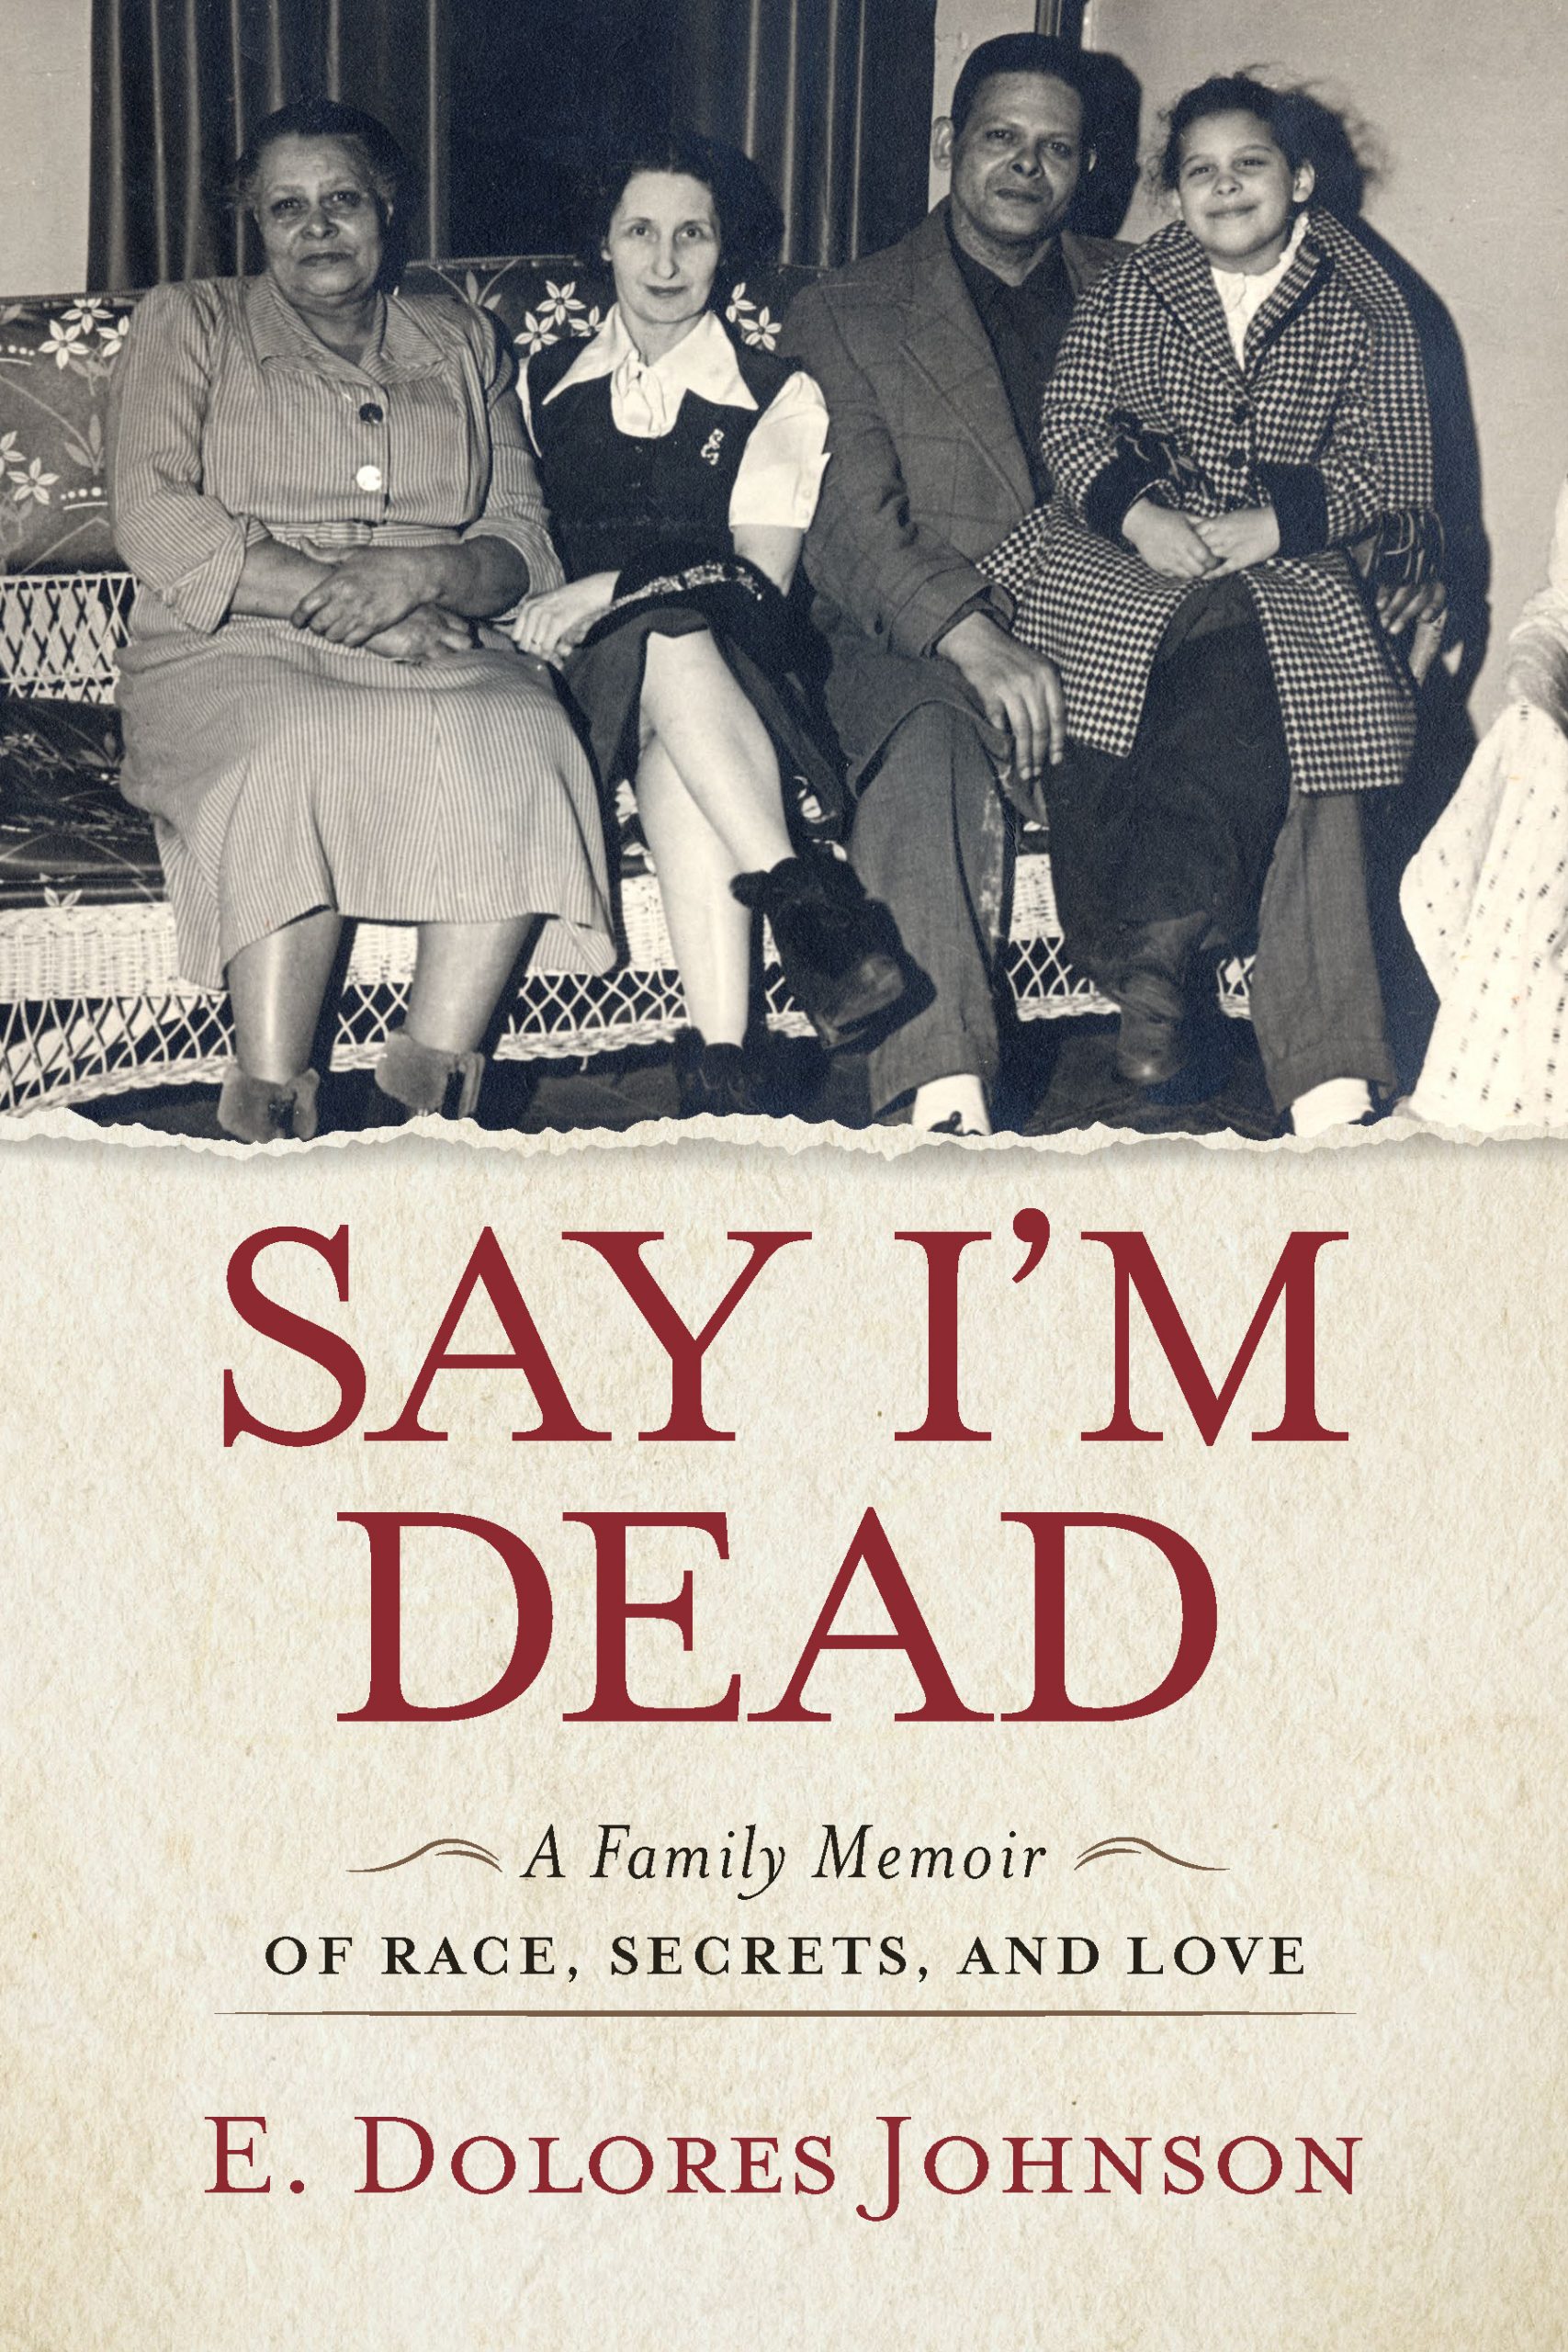 Cover from 'Say I'm Dead, A Family Memoir of Race, Secrets and Love.'